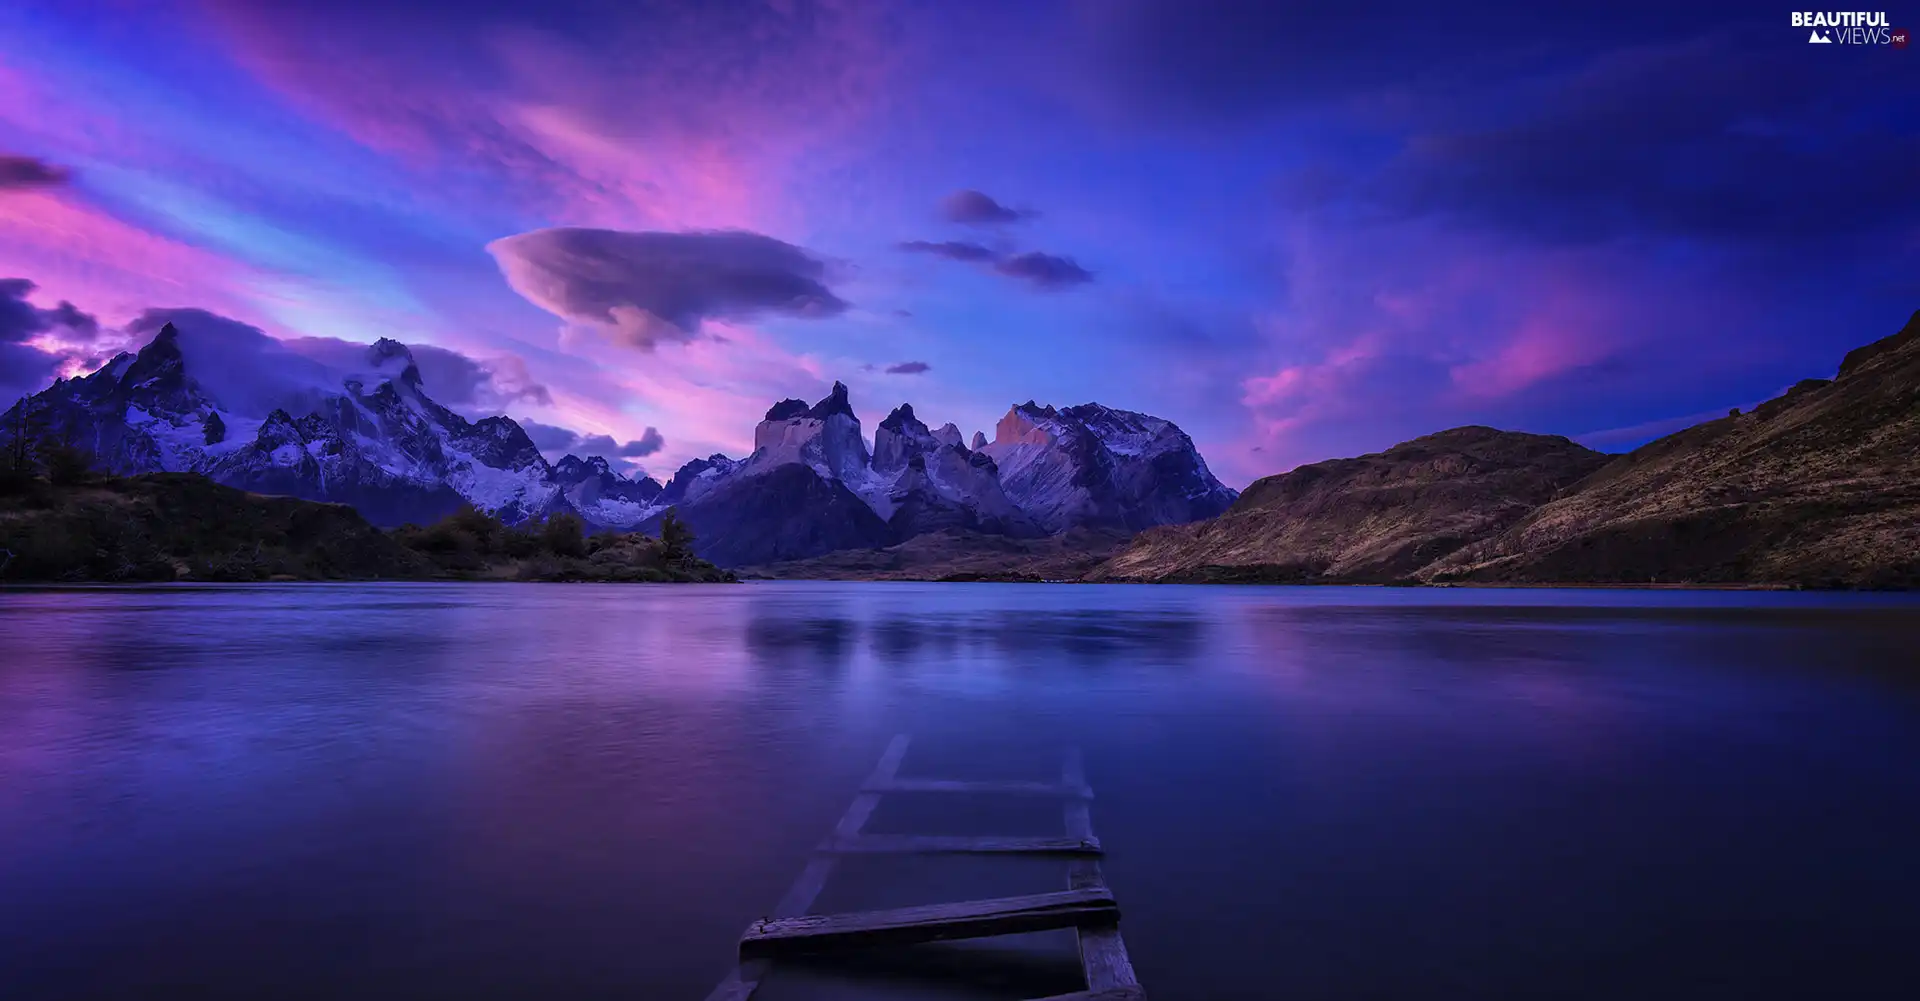 Torres del Paine Mountain Massif, Mountains, Torres del Paine National Park, lake, Platform, Patagonia, Chile, damaged